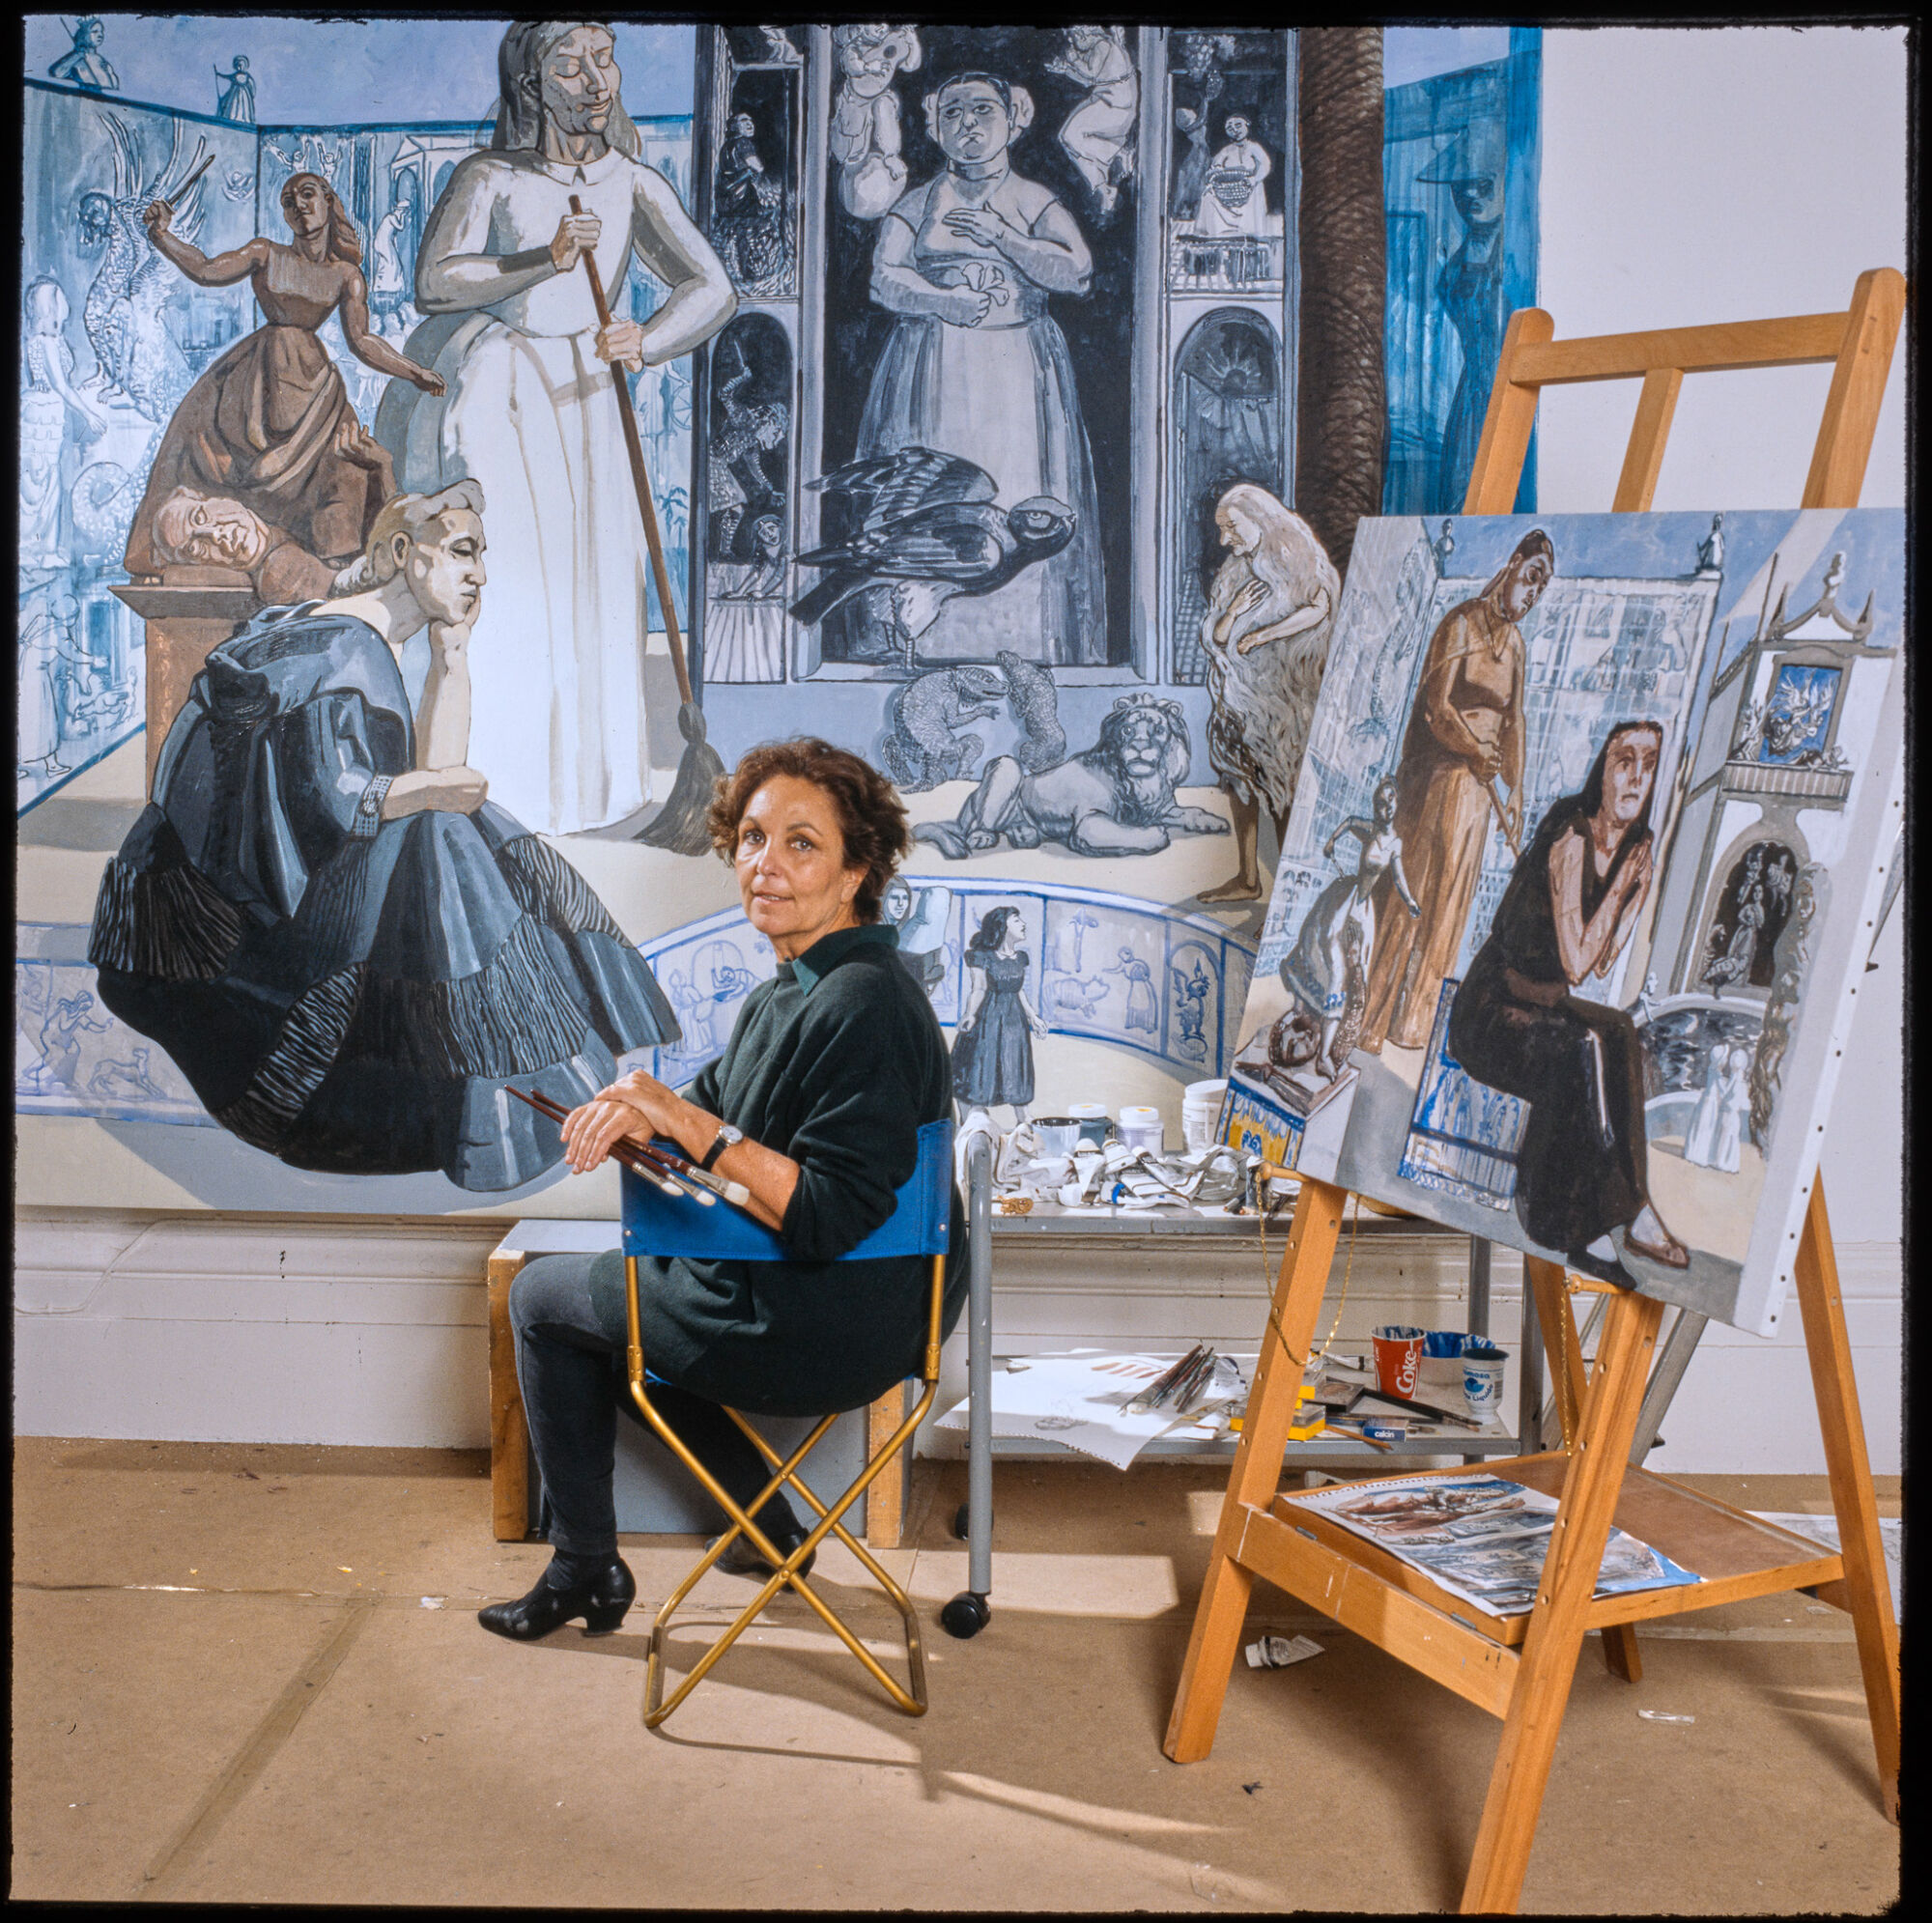 The Wick - Portrait of artist Paula Rego in her studio with Crivelli's Garden, 1990
© Ostrich Arts Ltd. Photo: The National Gallery, London.
